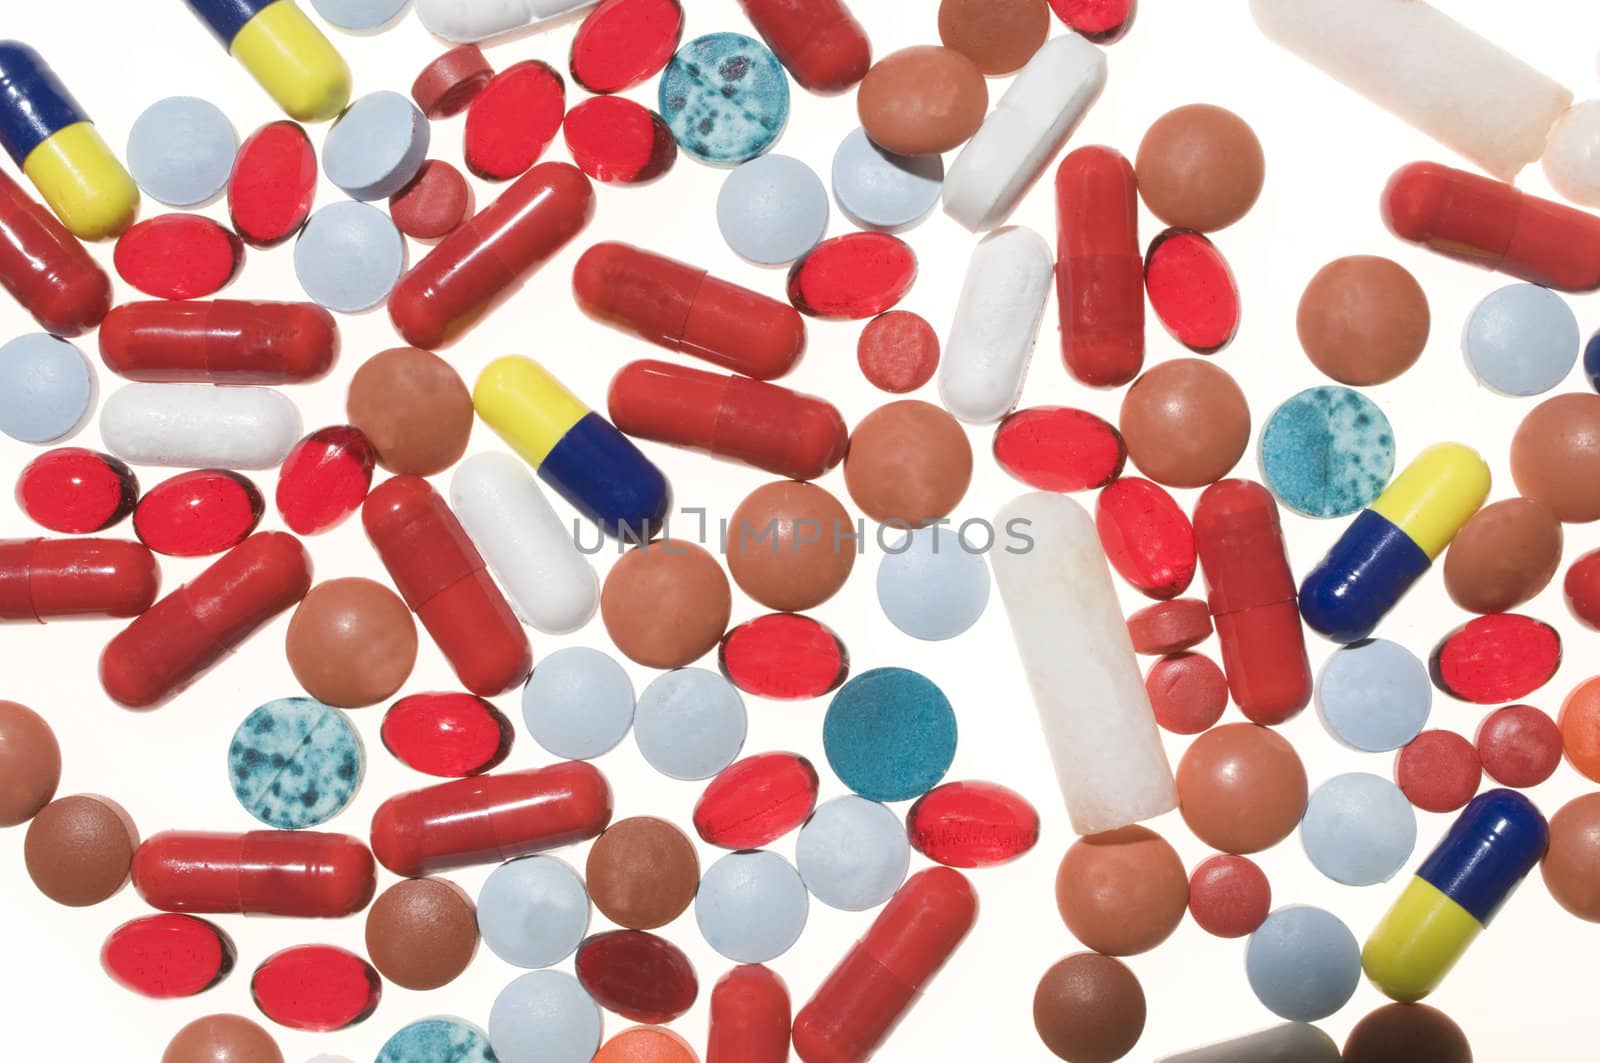 A variety of prescription drugs intermixed
